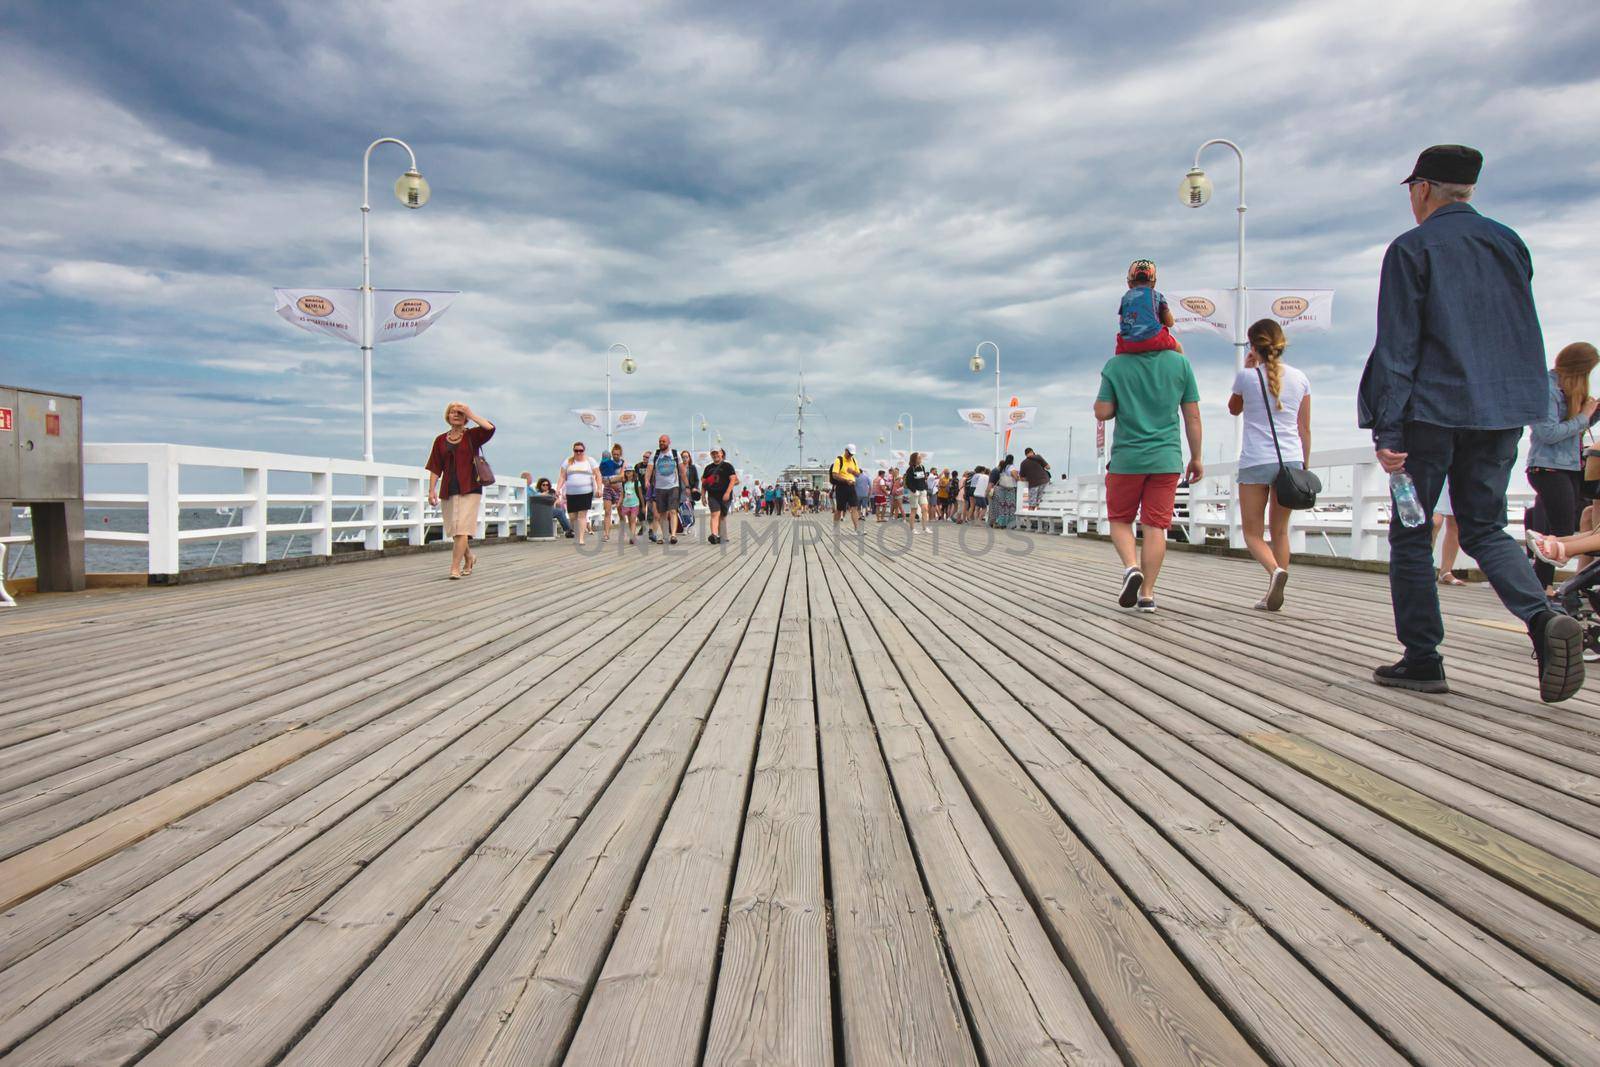 Sopot / Croatia - August 3 2019: People walking on the wooden boards of the pier at Sopot beach by tennesseewitney